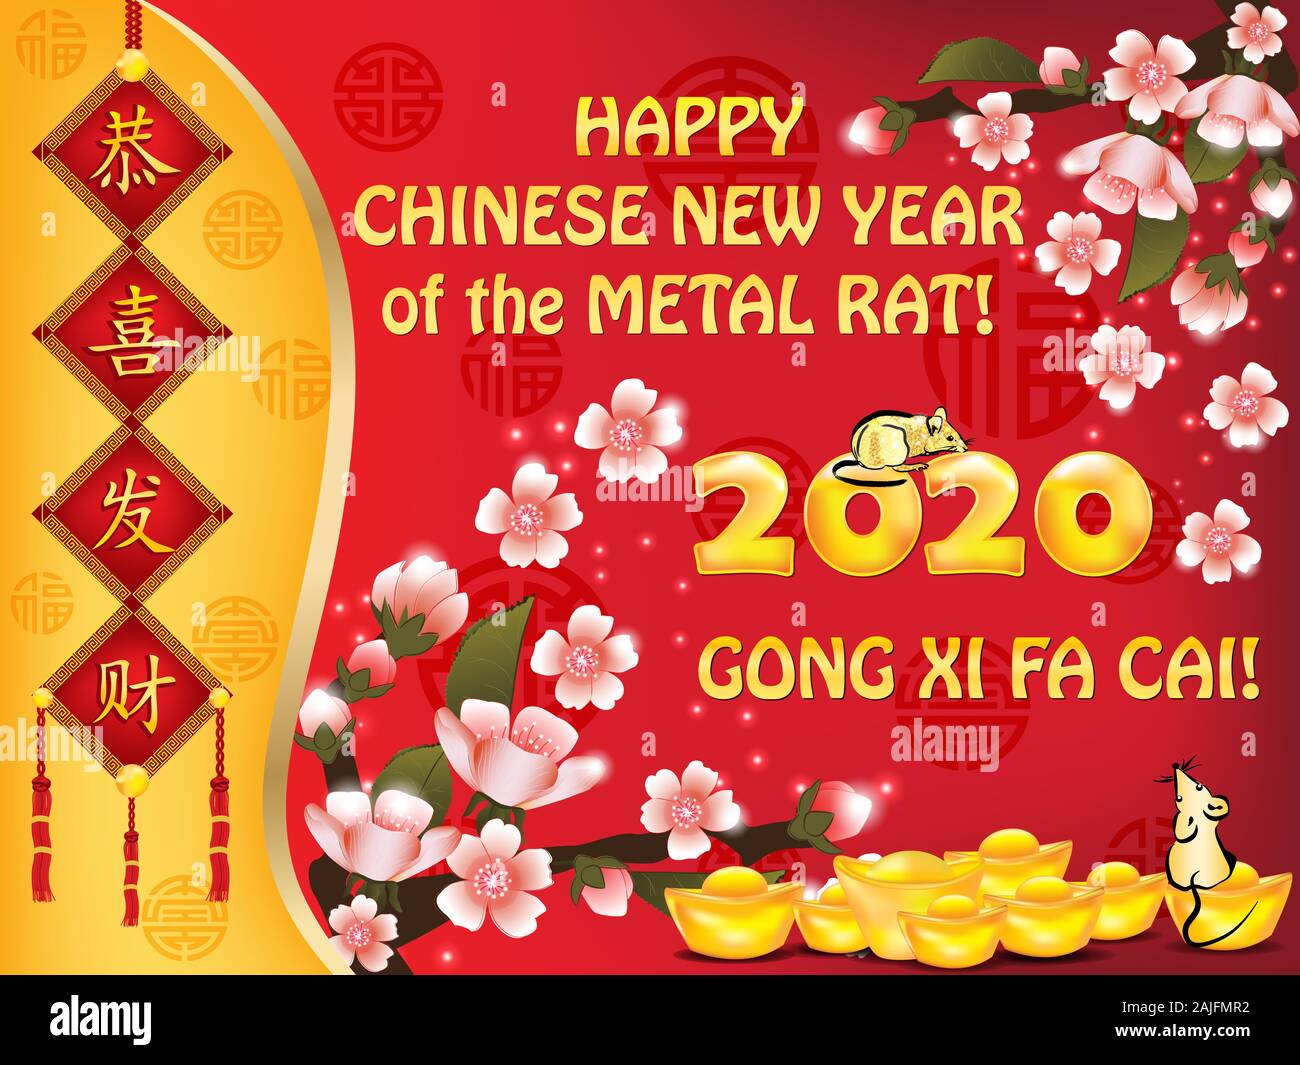 Happy Chinese New Year 2020. Floral greeting card with text in Chinese and English. Ideograms translation: Congratulations and make fortune. Stock Photo